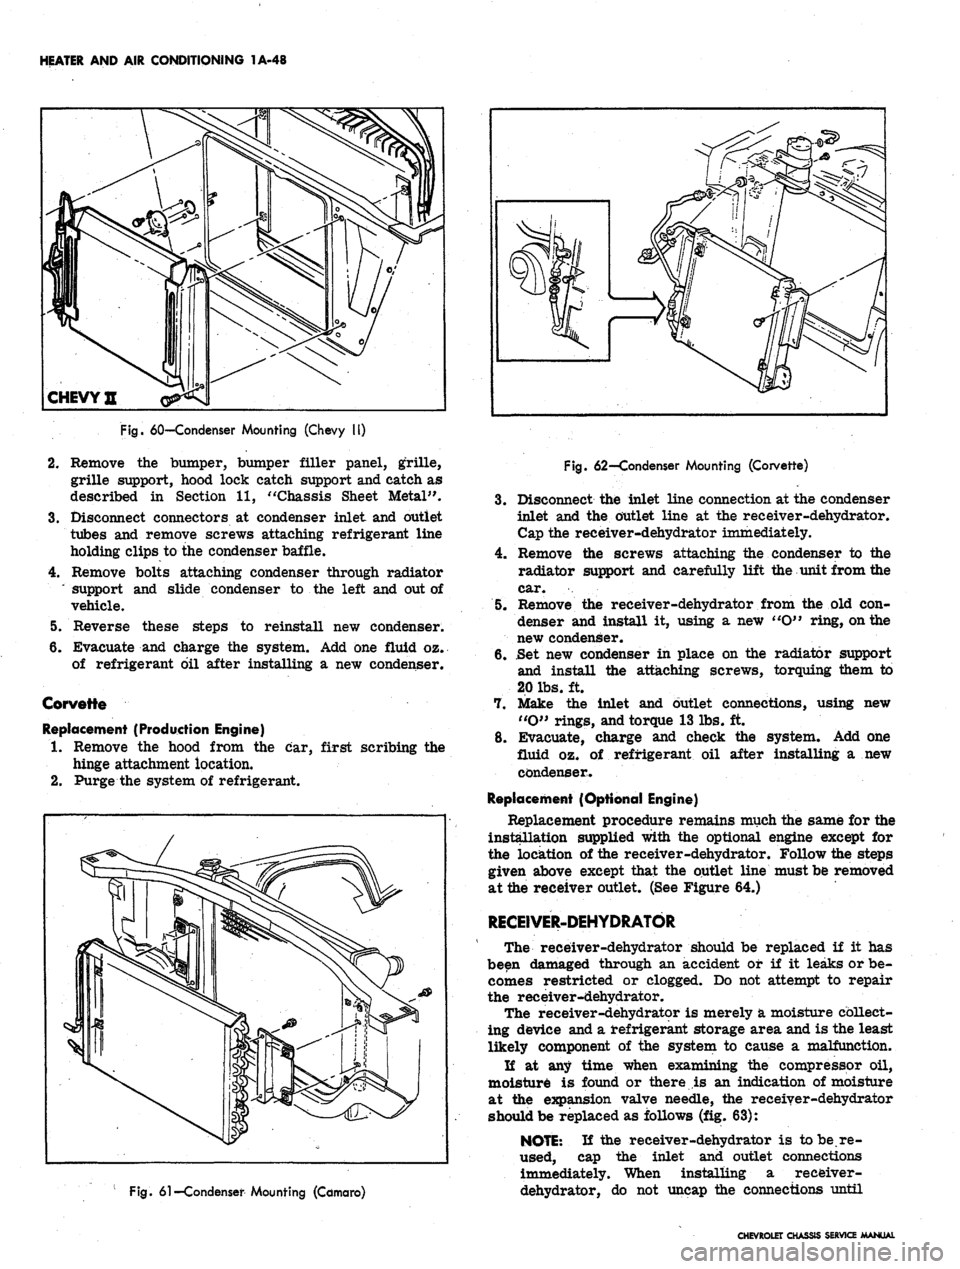 CHEVROLET CAMARO 1967 1.G Chassis Owners Guide 
HEATER AND AIR CONDITIONING 1A-48

Fig.
 60-Condenser Mounting (Chevy II)

2.
 Remove the bumper, bumper filler panel, grille,

grille support, hood lock catch support and catch as

described in Sect